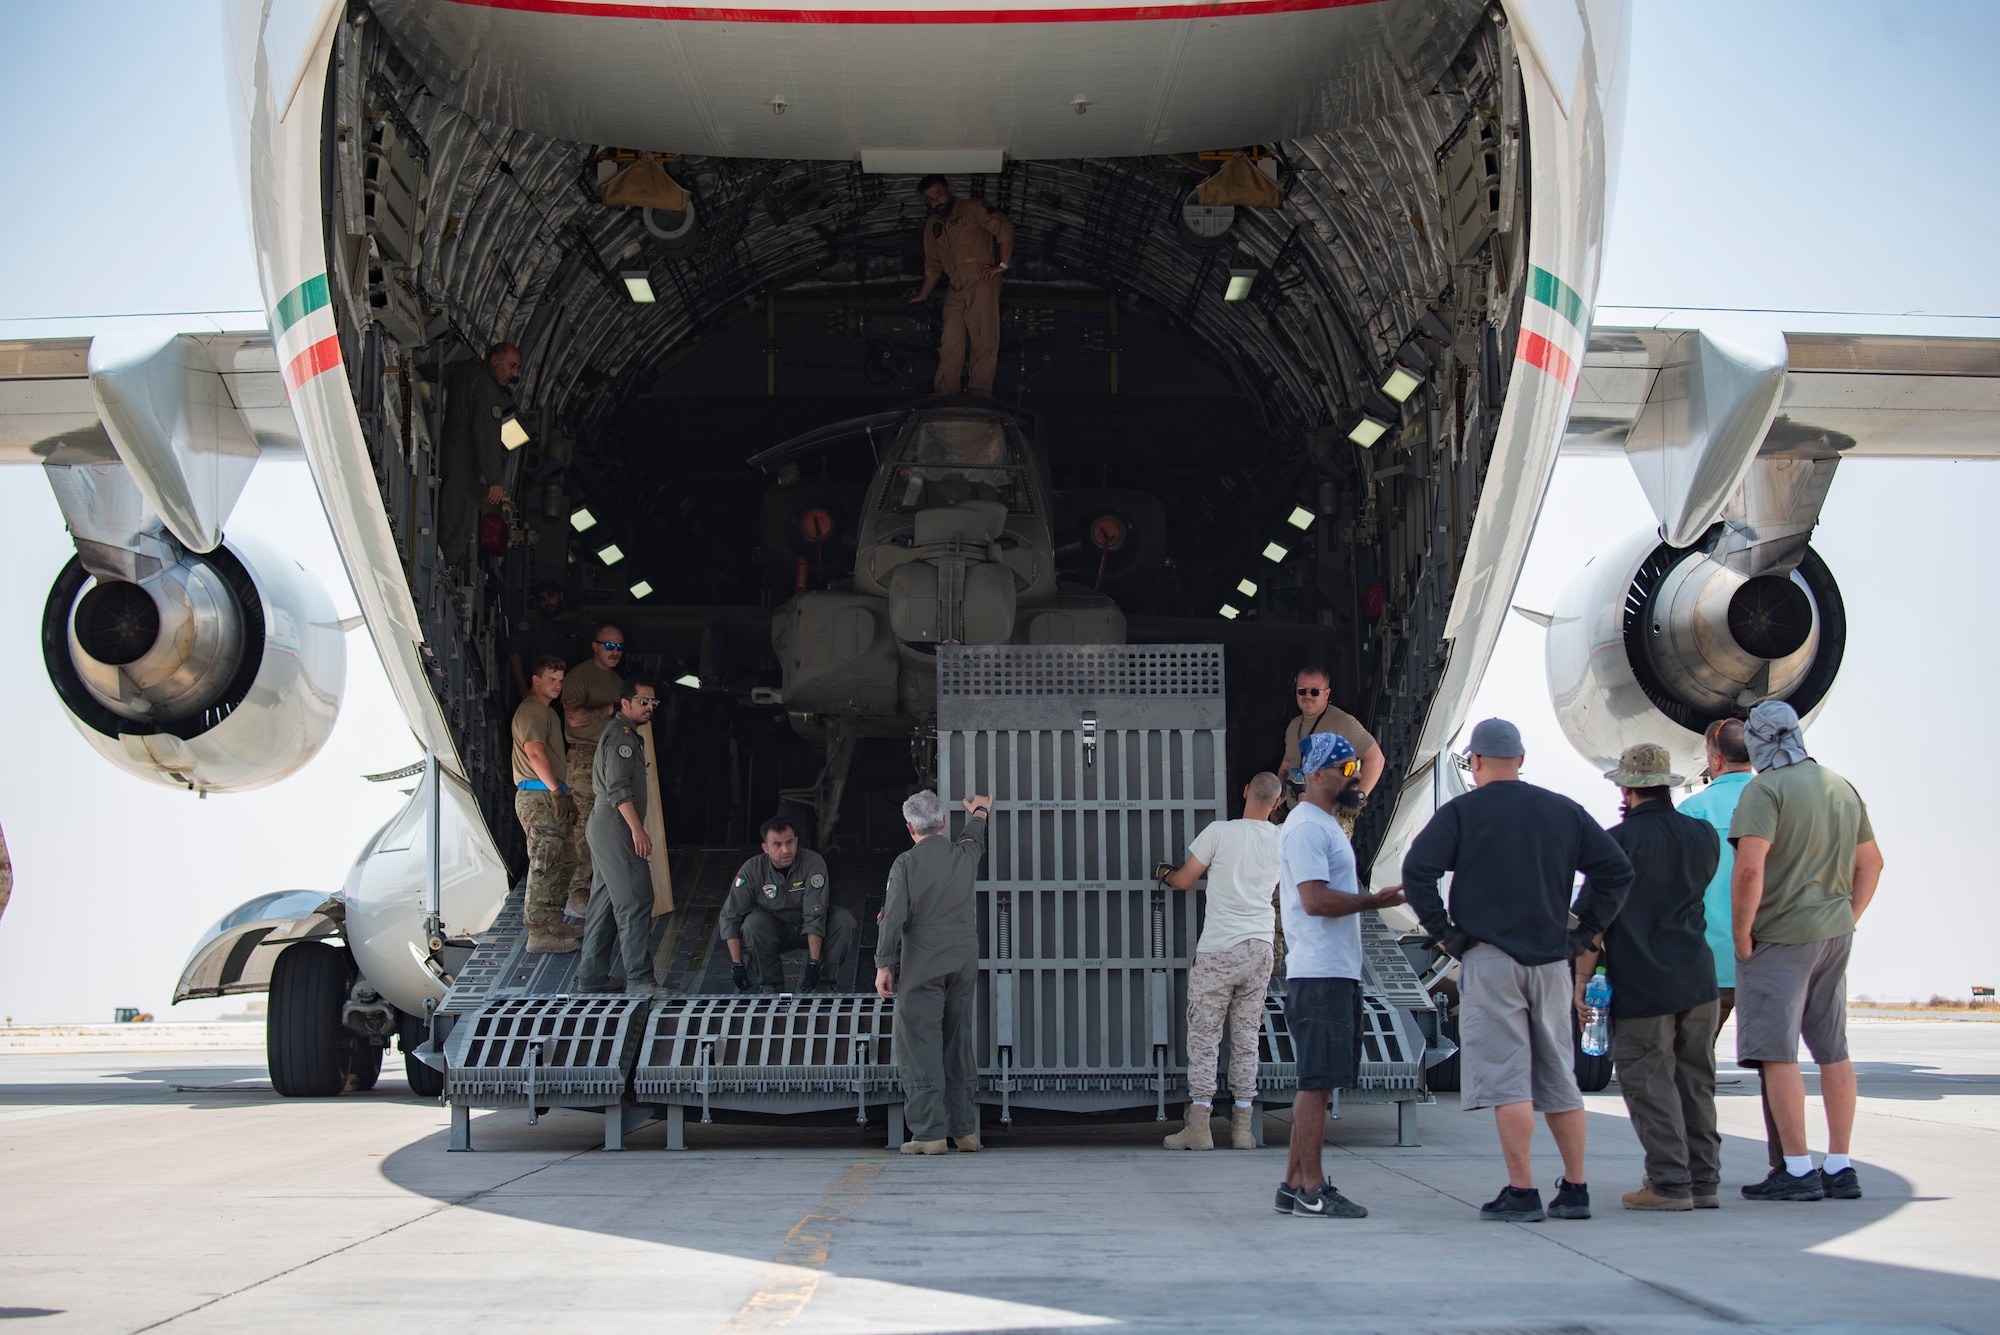 U.S. Airmen and members of the Kuwait Air Force load an AH-64E APACHE on a Kuwait Air Force C-17 Globemaster III at Ali Al Salem Air Base, Kuwait, July 26, 2021. One of the priorities of the 386th Air Expeditionary Wing is to foster enduring partnerships. These partnerships are built on mutual respect and critical to current and future missions. (U.S. Air Force Senior Airman Helena Owens)